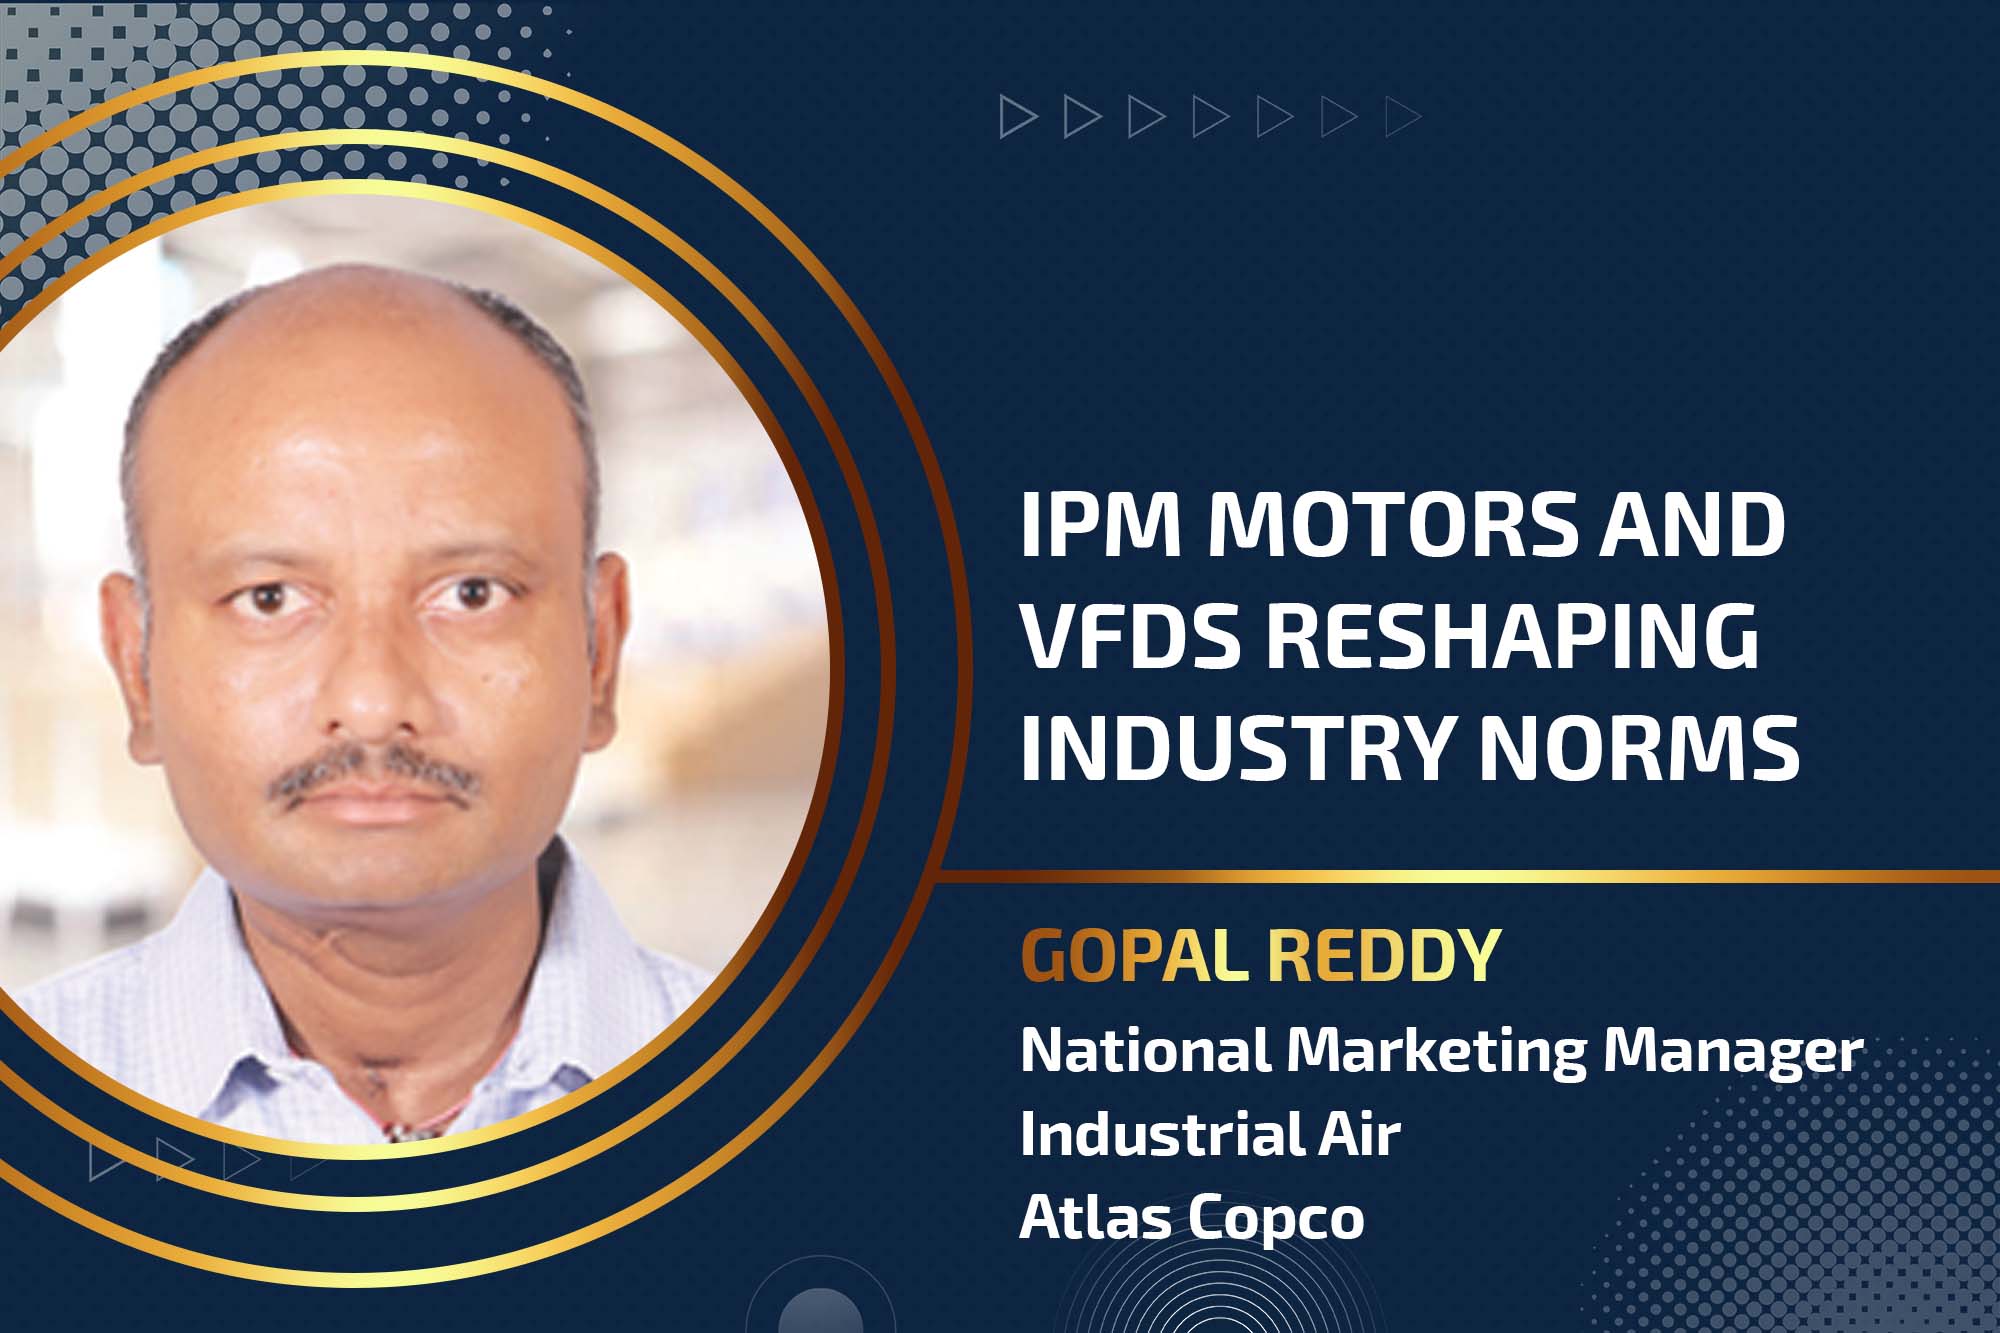 iPM Motors and VFDs reshaping industry norms